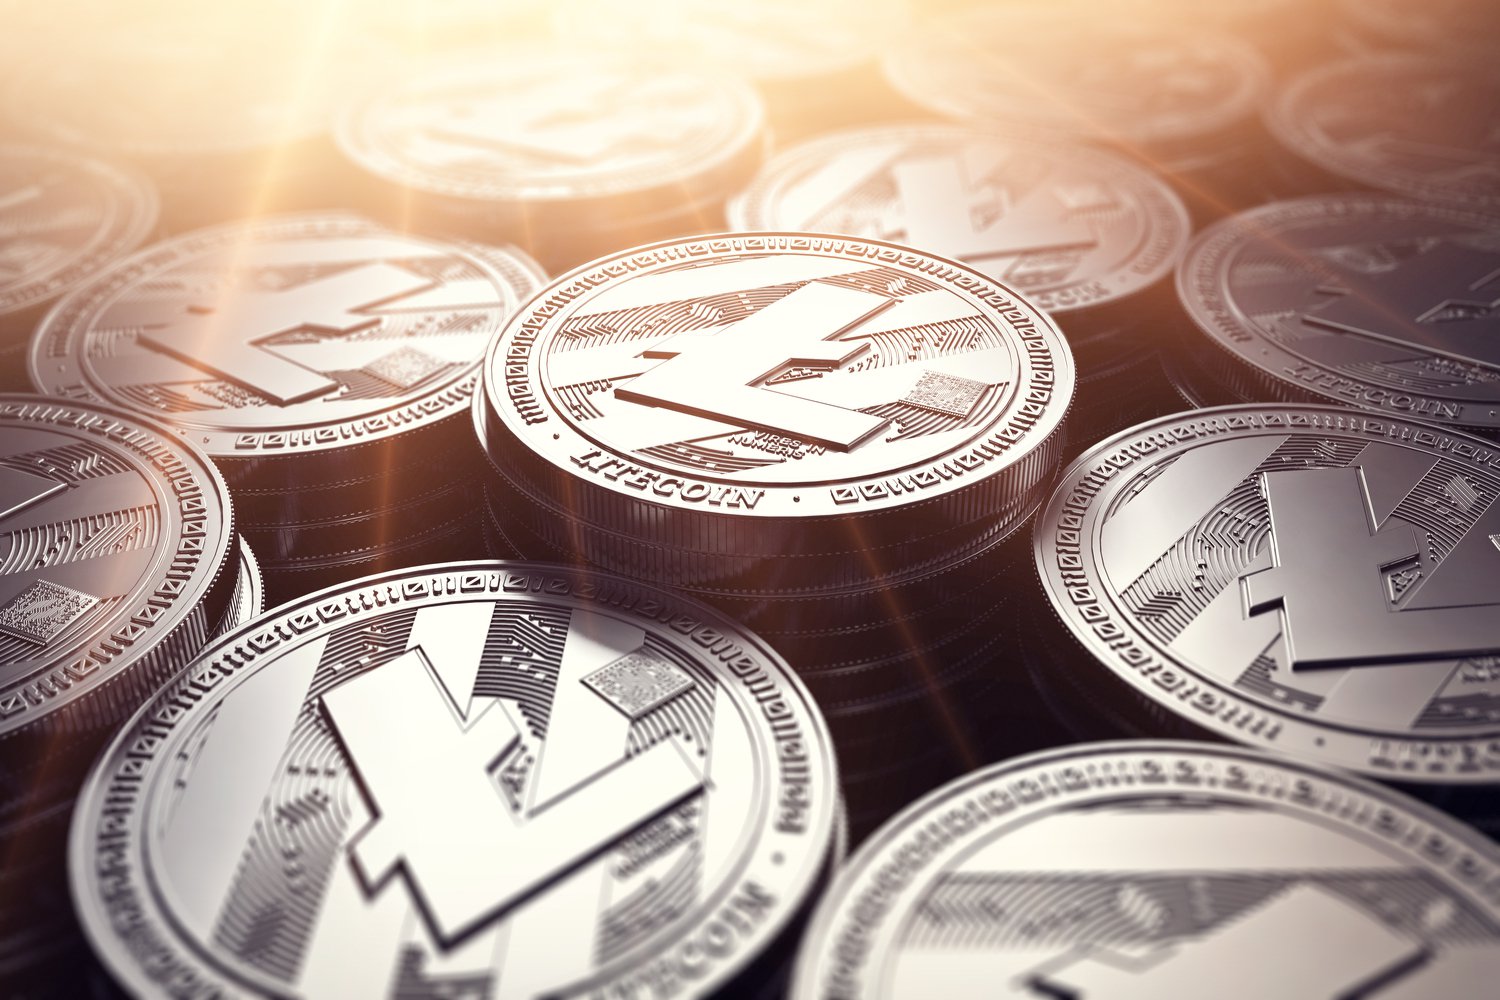 Gemini Adds Litecoin Trading With New York Watchdog Approval